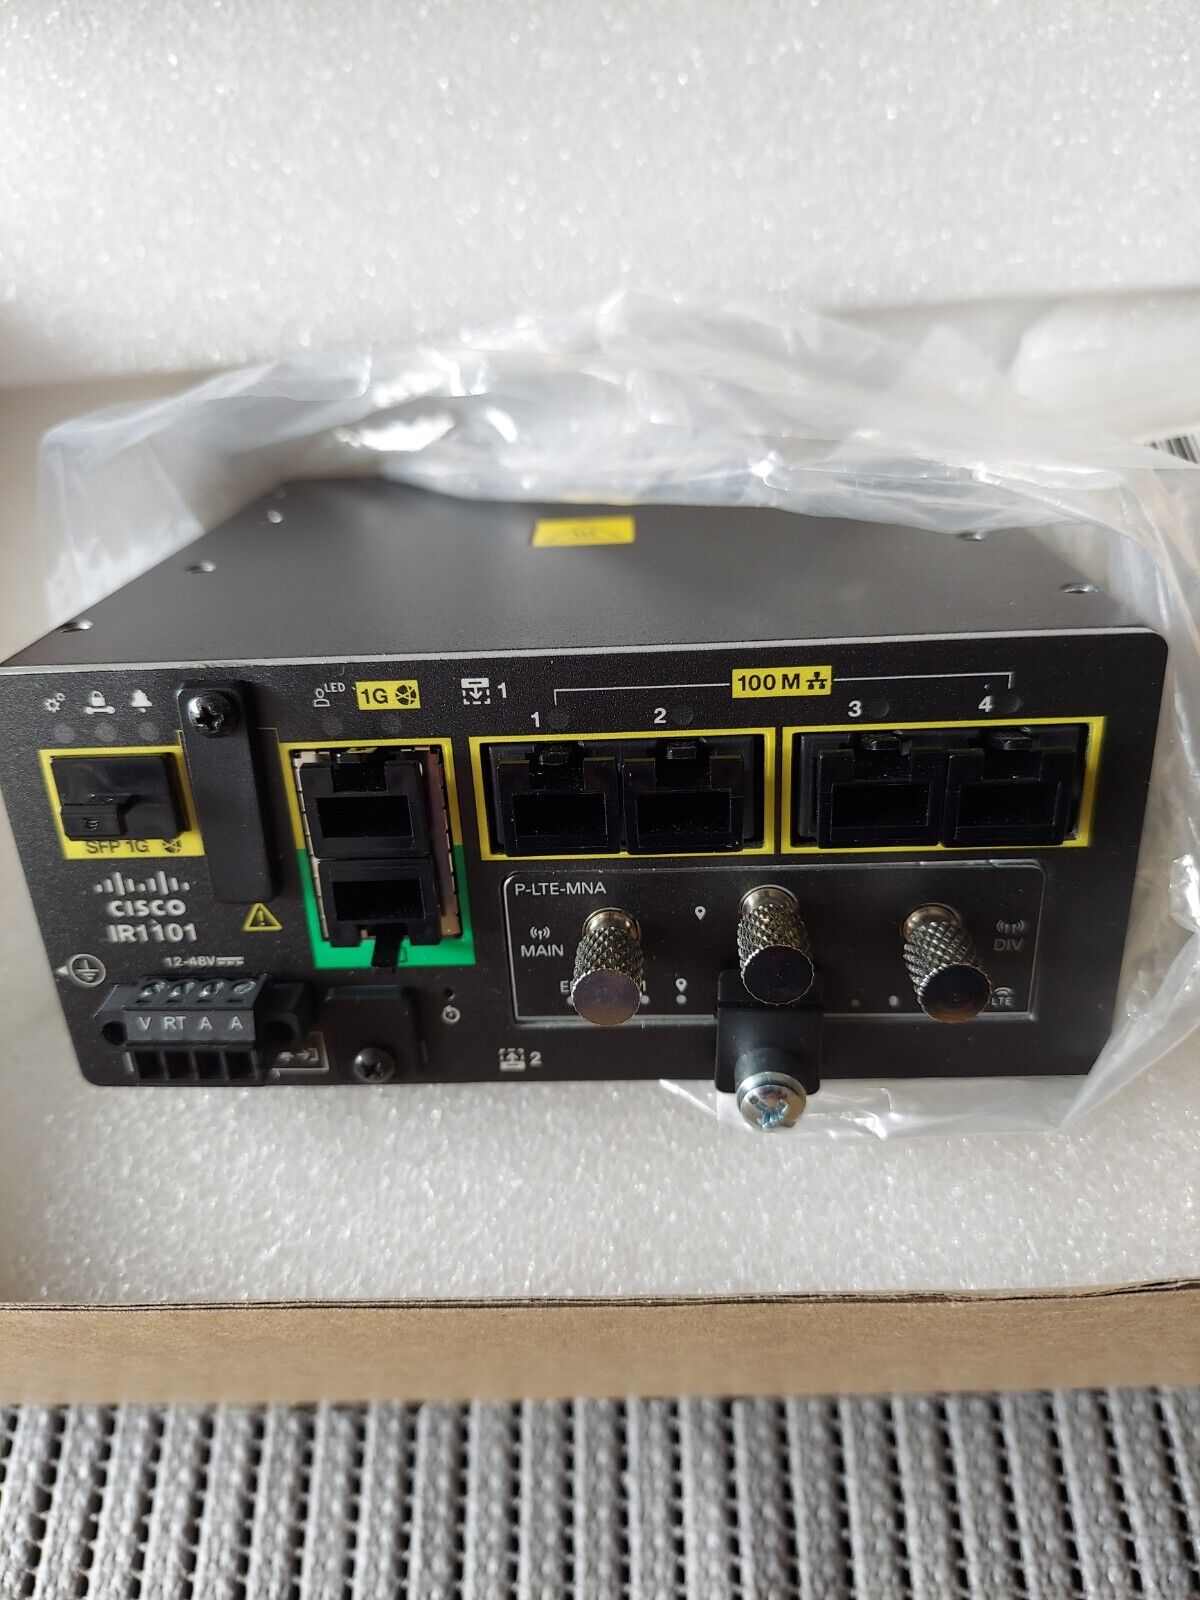 Cisco Catalyst IR1101-K9 Rugged Series Industrial Router New Opened